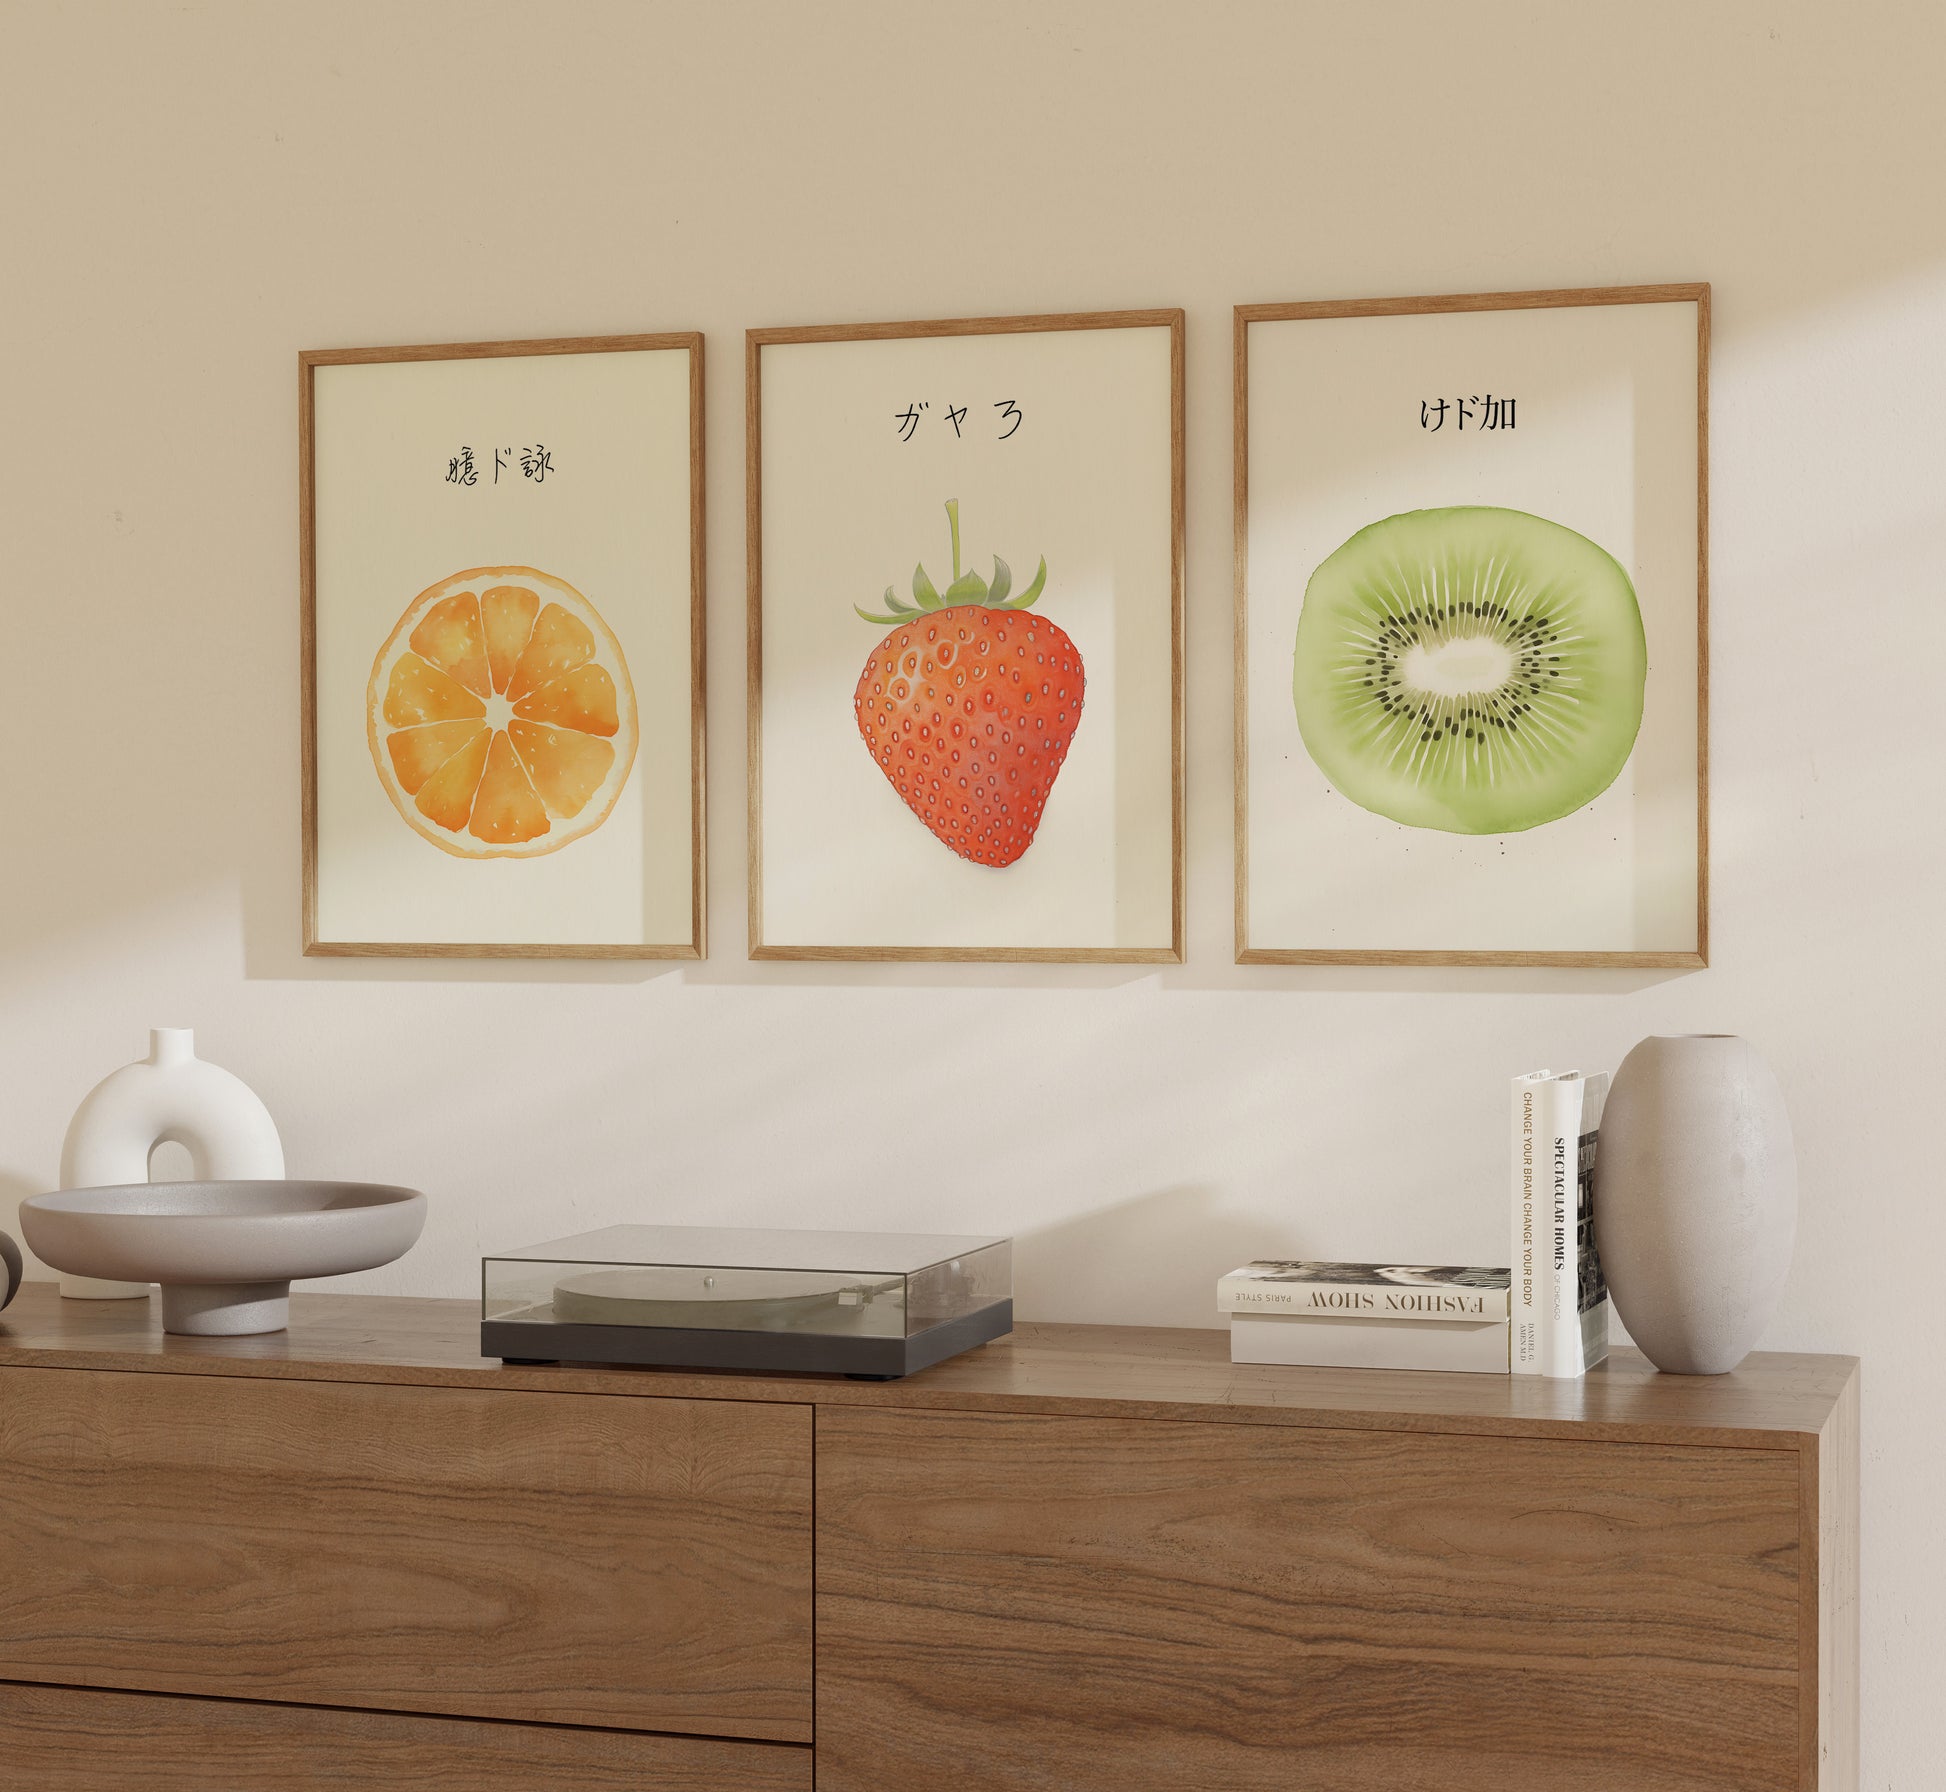 Three framed illustrations of fruit with Japanese text on a wall above a wooden sideboard.